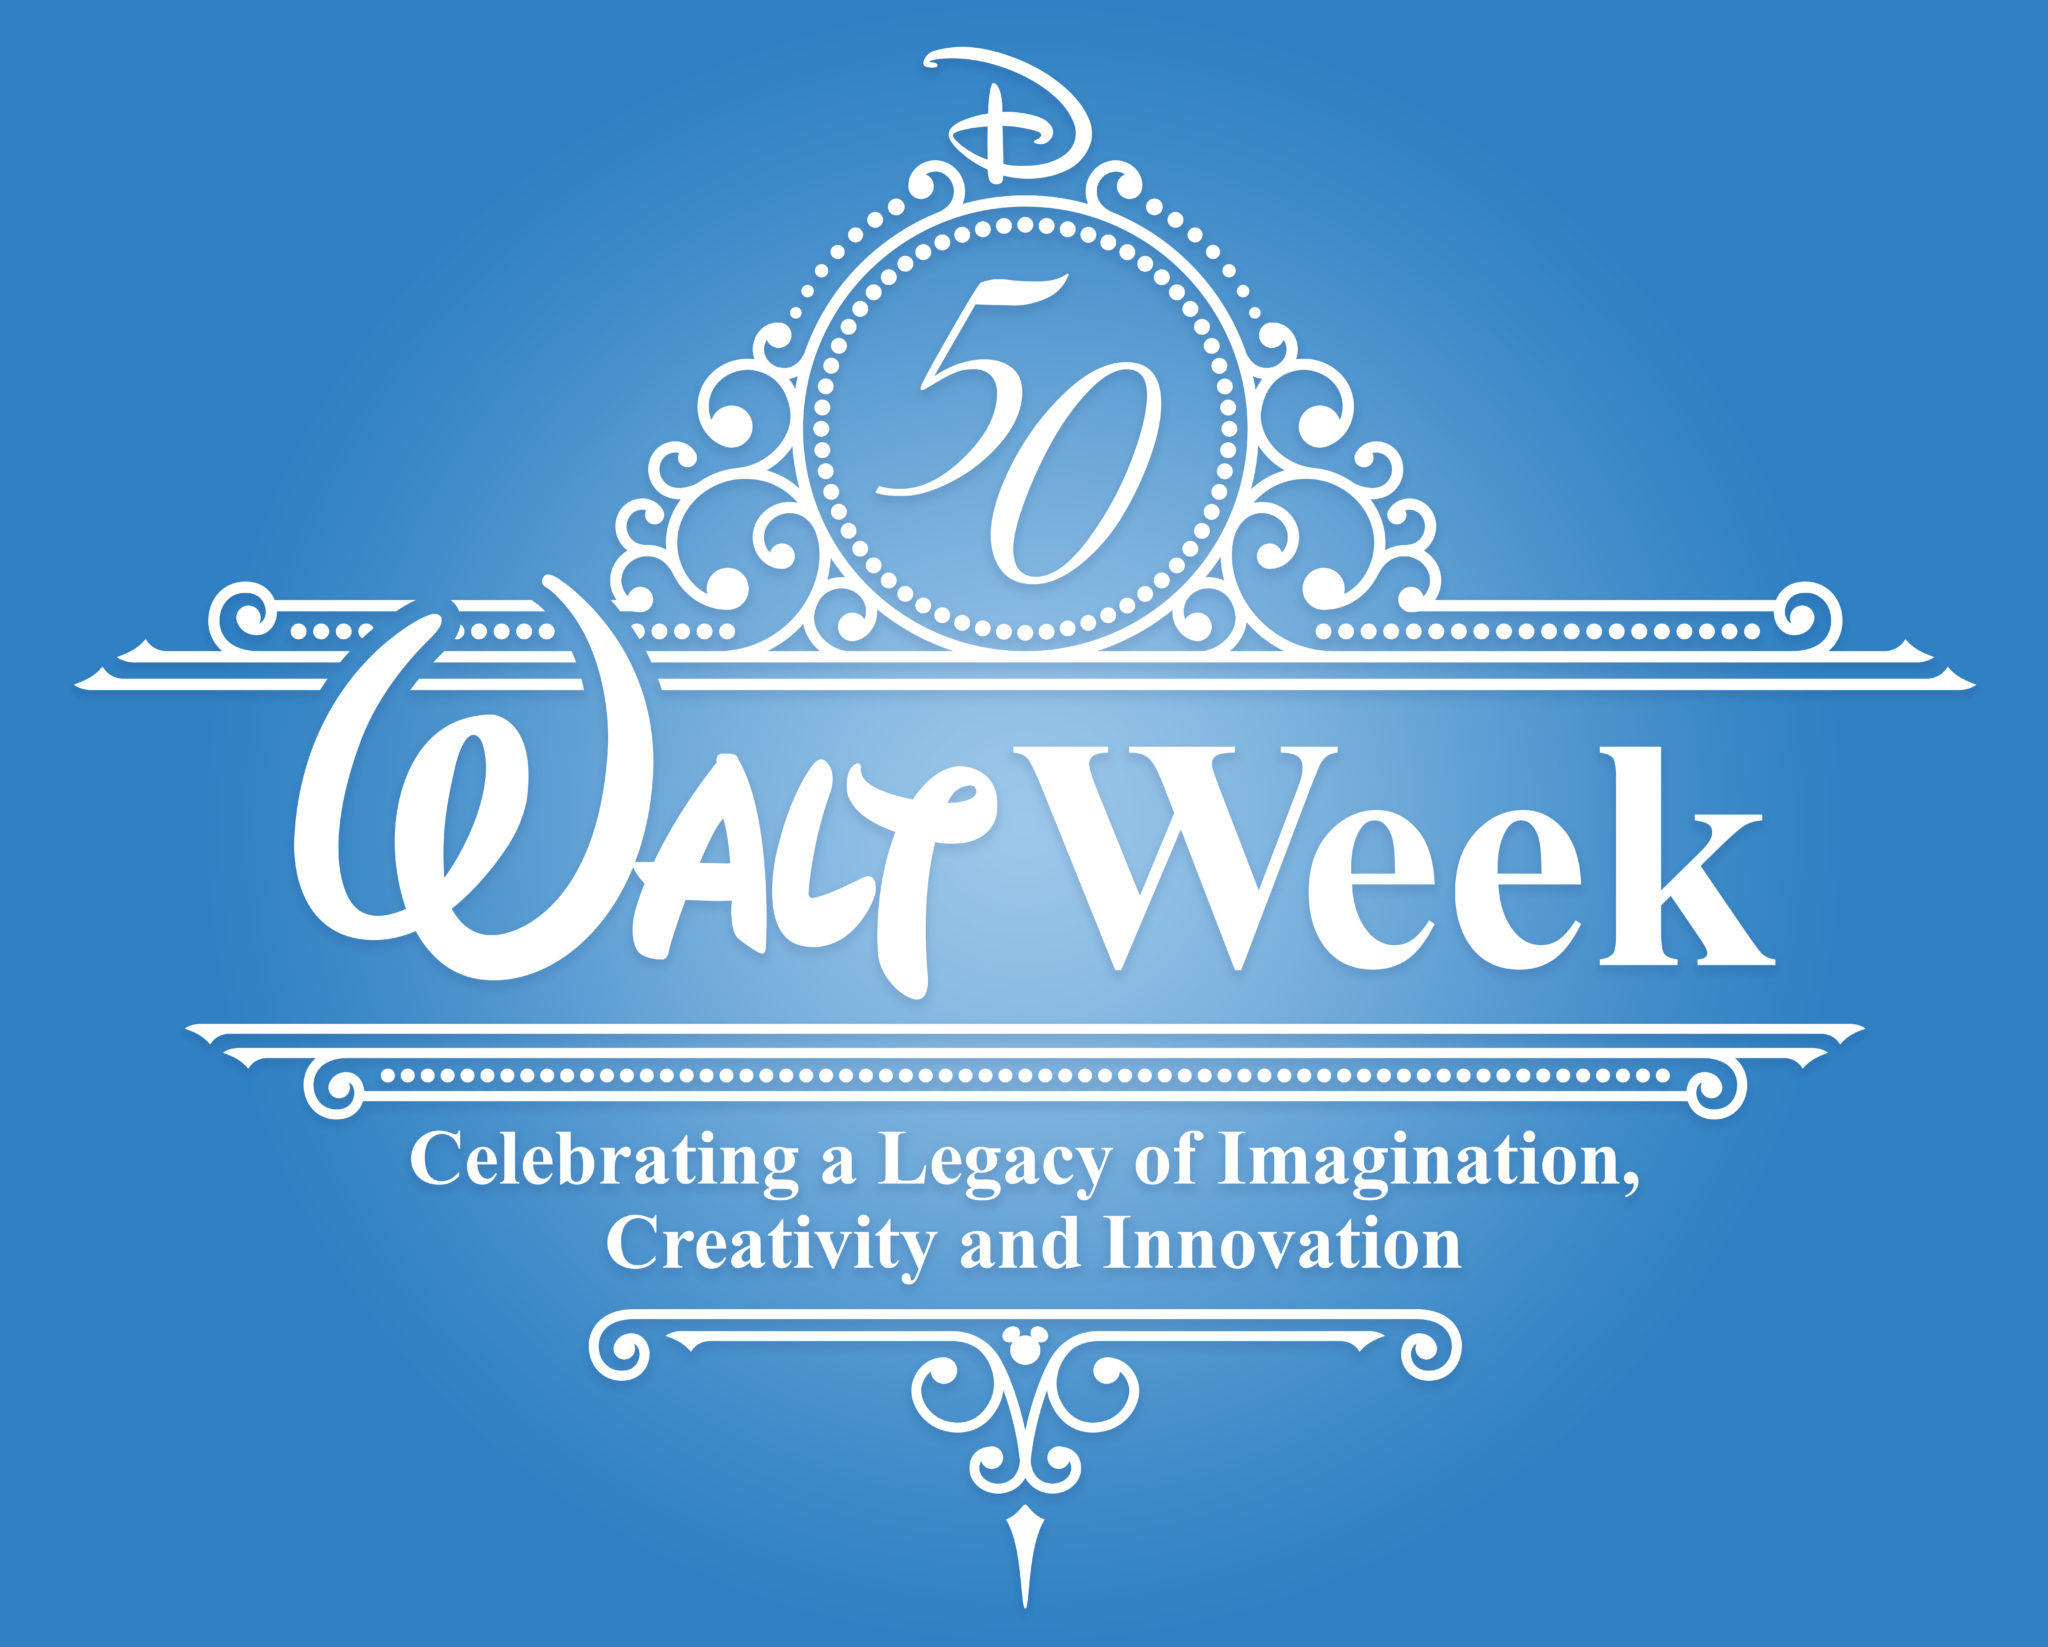 ‘Walt Week’ Being Celebrated by Disney Parks and Resorts